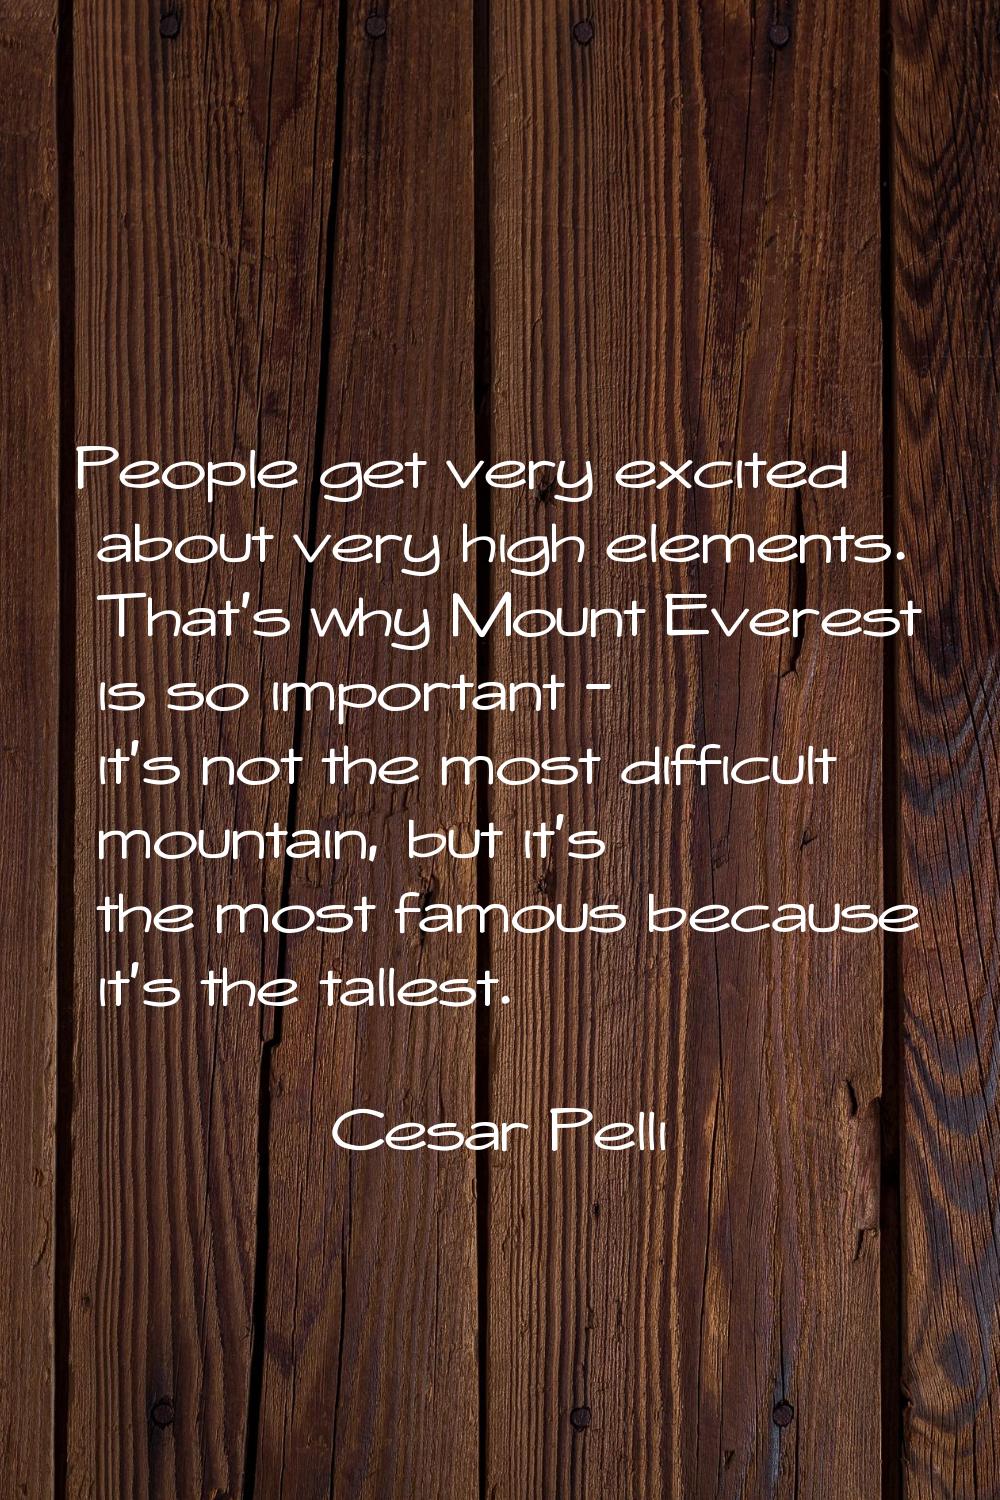 People get very excited about very high elements. That's why Mount Everest is so important - it's n